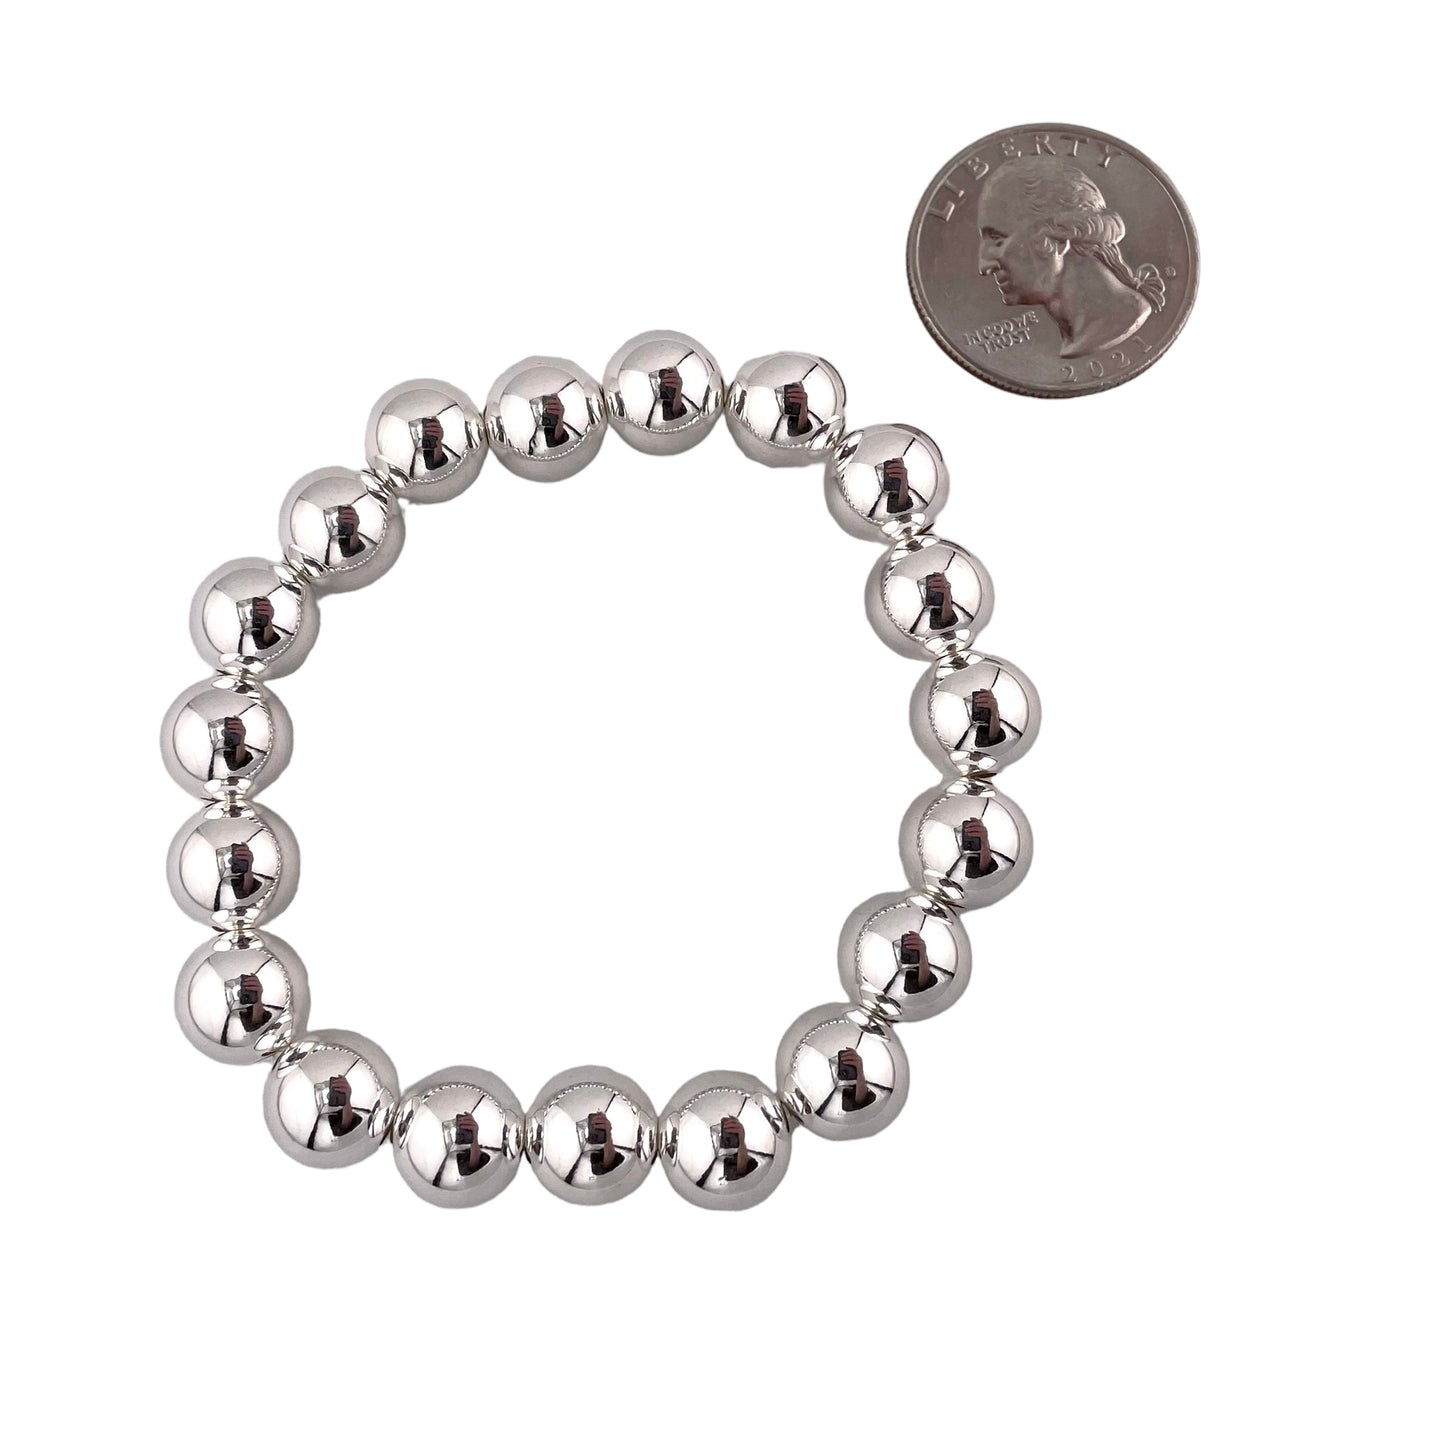 Bead Stretch Bracelet Sterling Silver Available in 3mm to 12mm